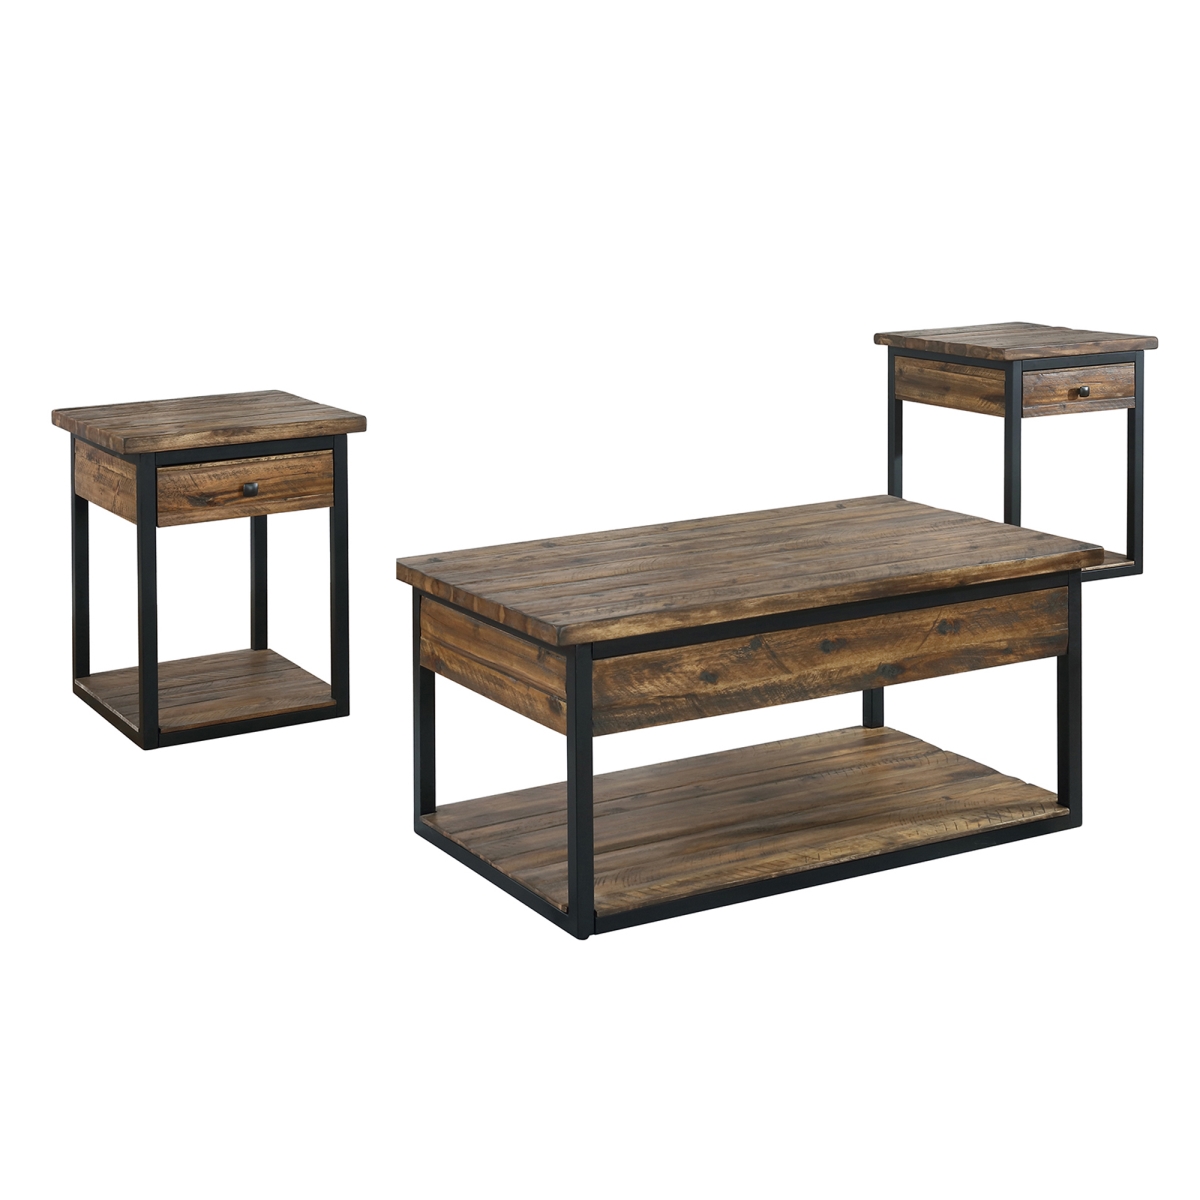 Picture of Alaterre ANCM011174 Claremont Rustic Wood Set with Coffee & End Table with Drawer